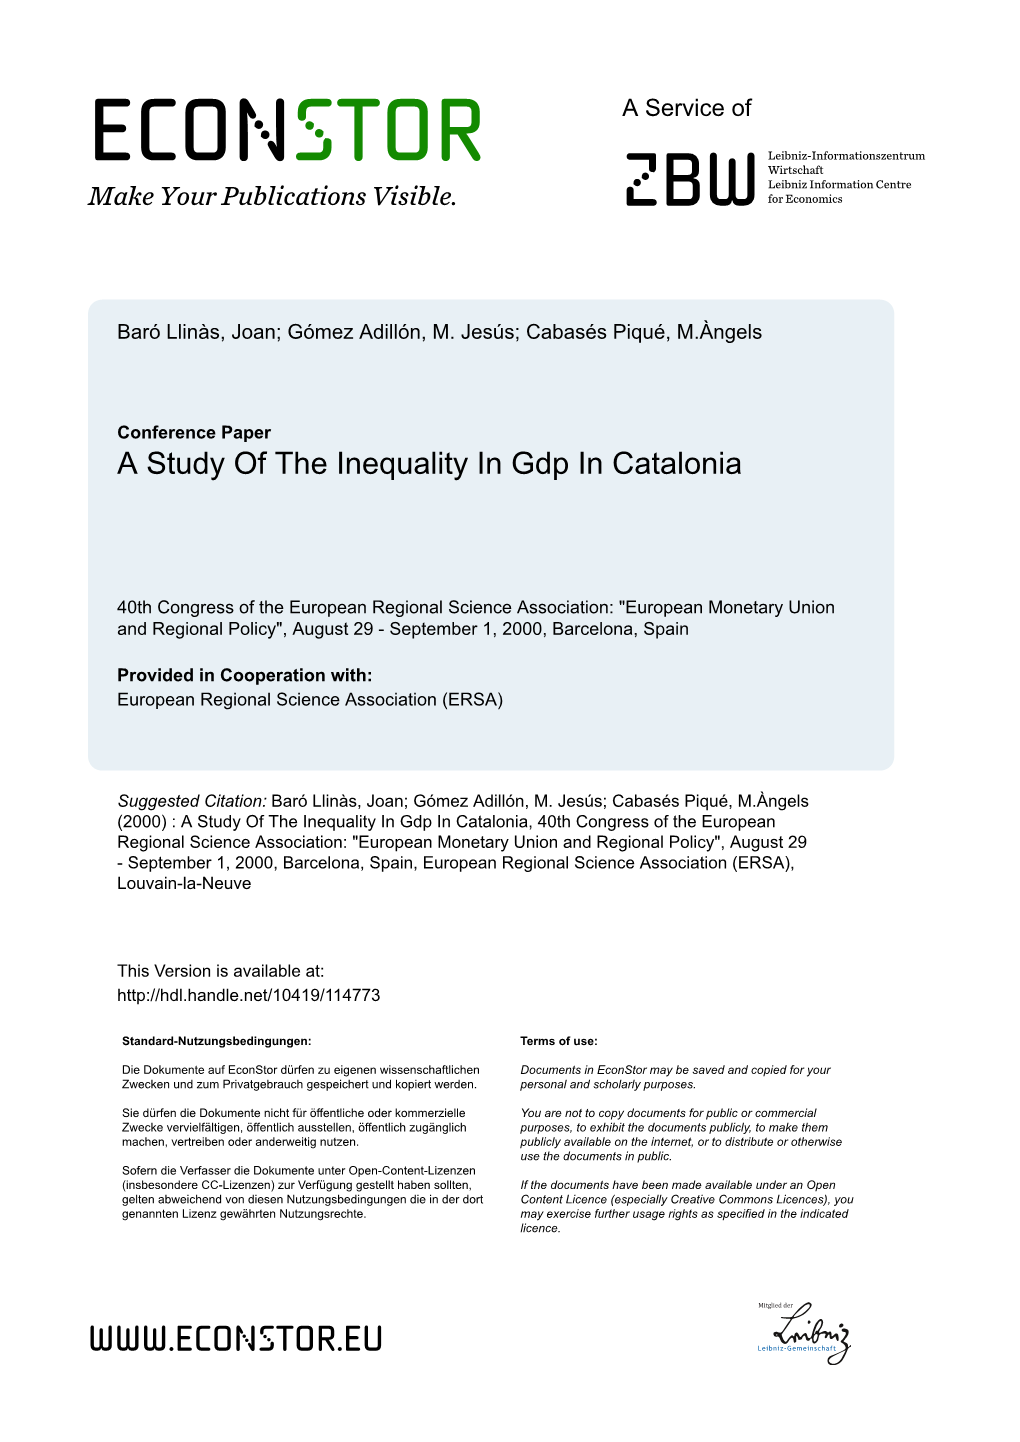 A Study of the Inequality in Gdp in Catalonia